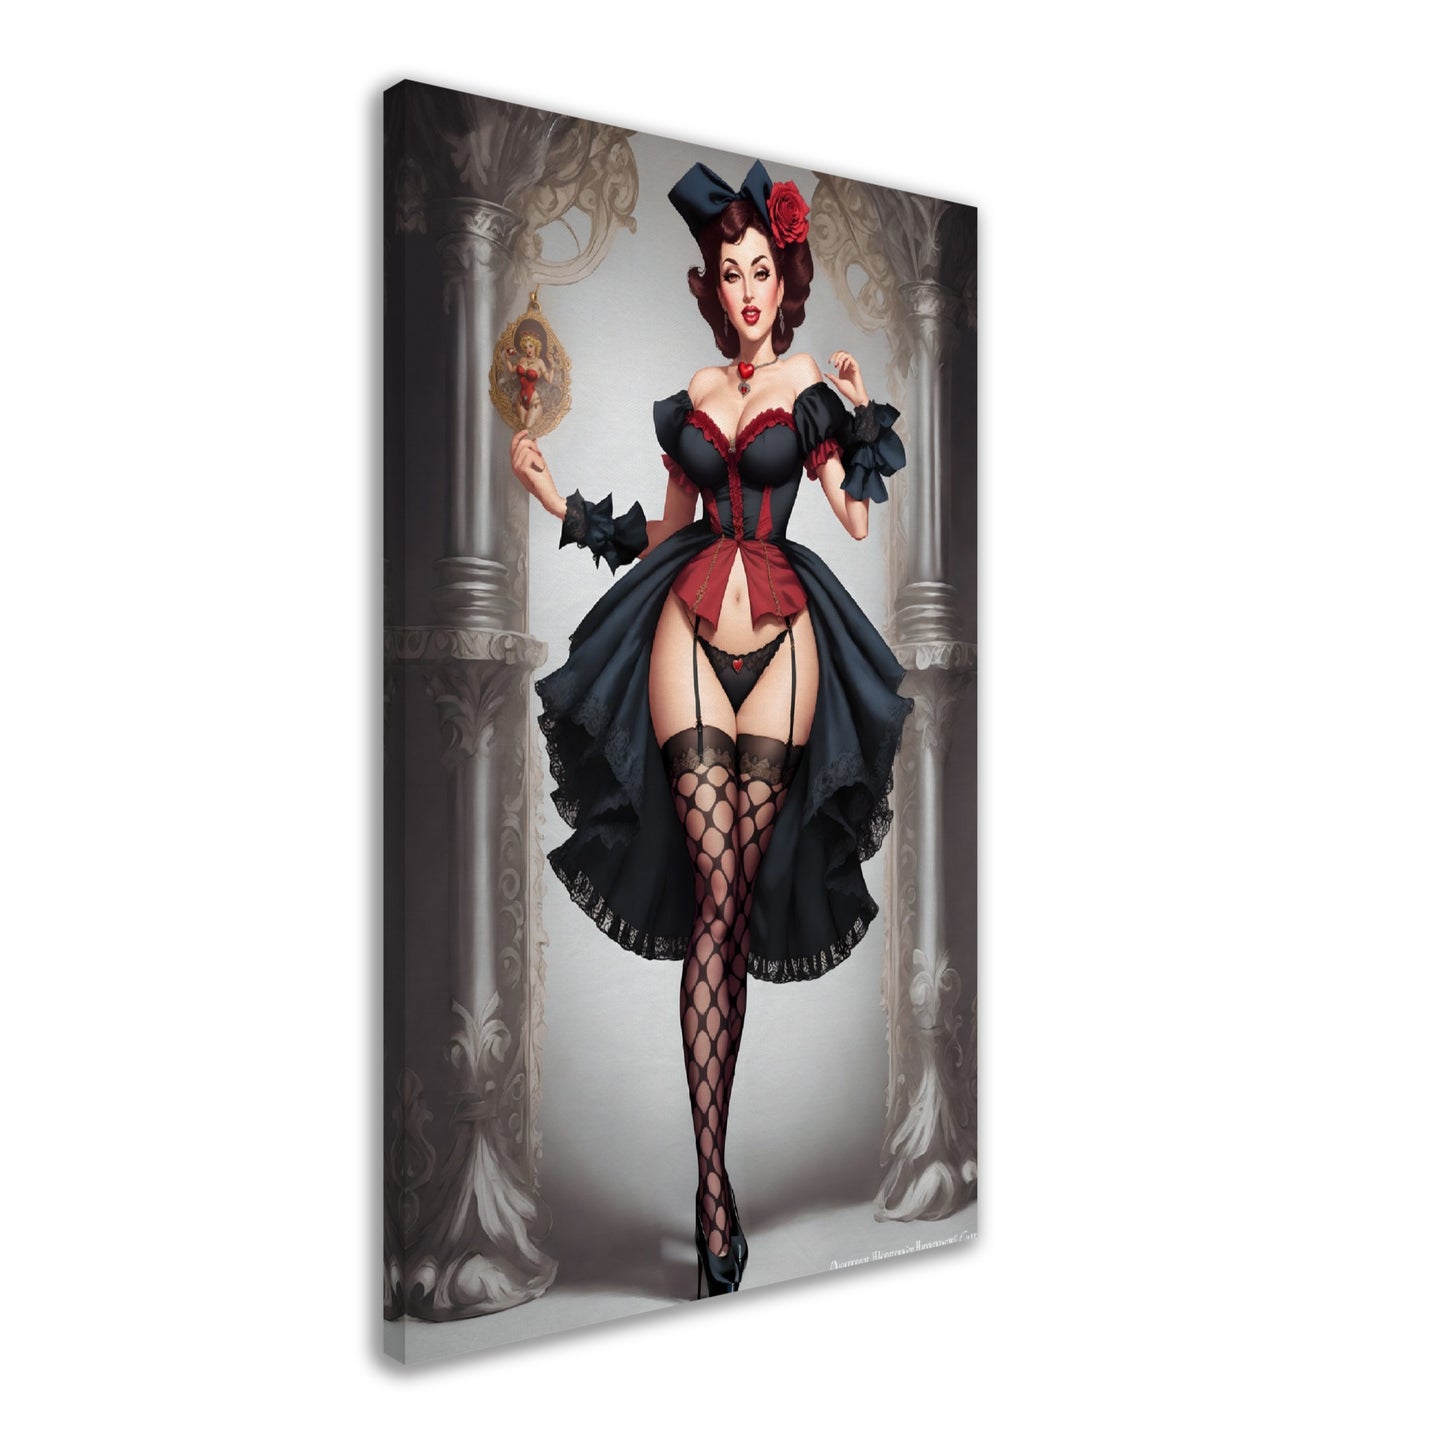 Daily Pinup #22 - Queen of Hearts Wall Art